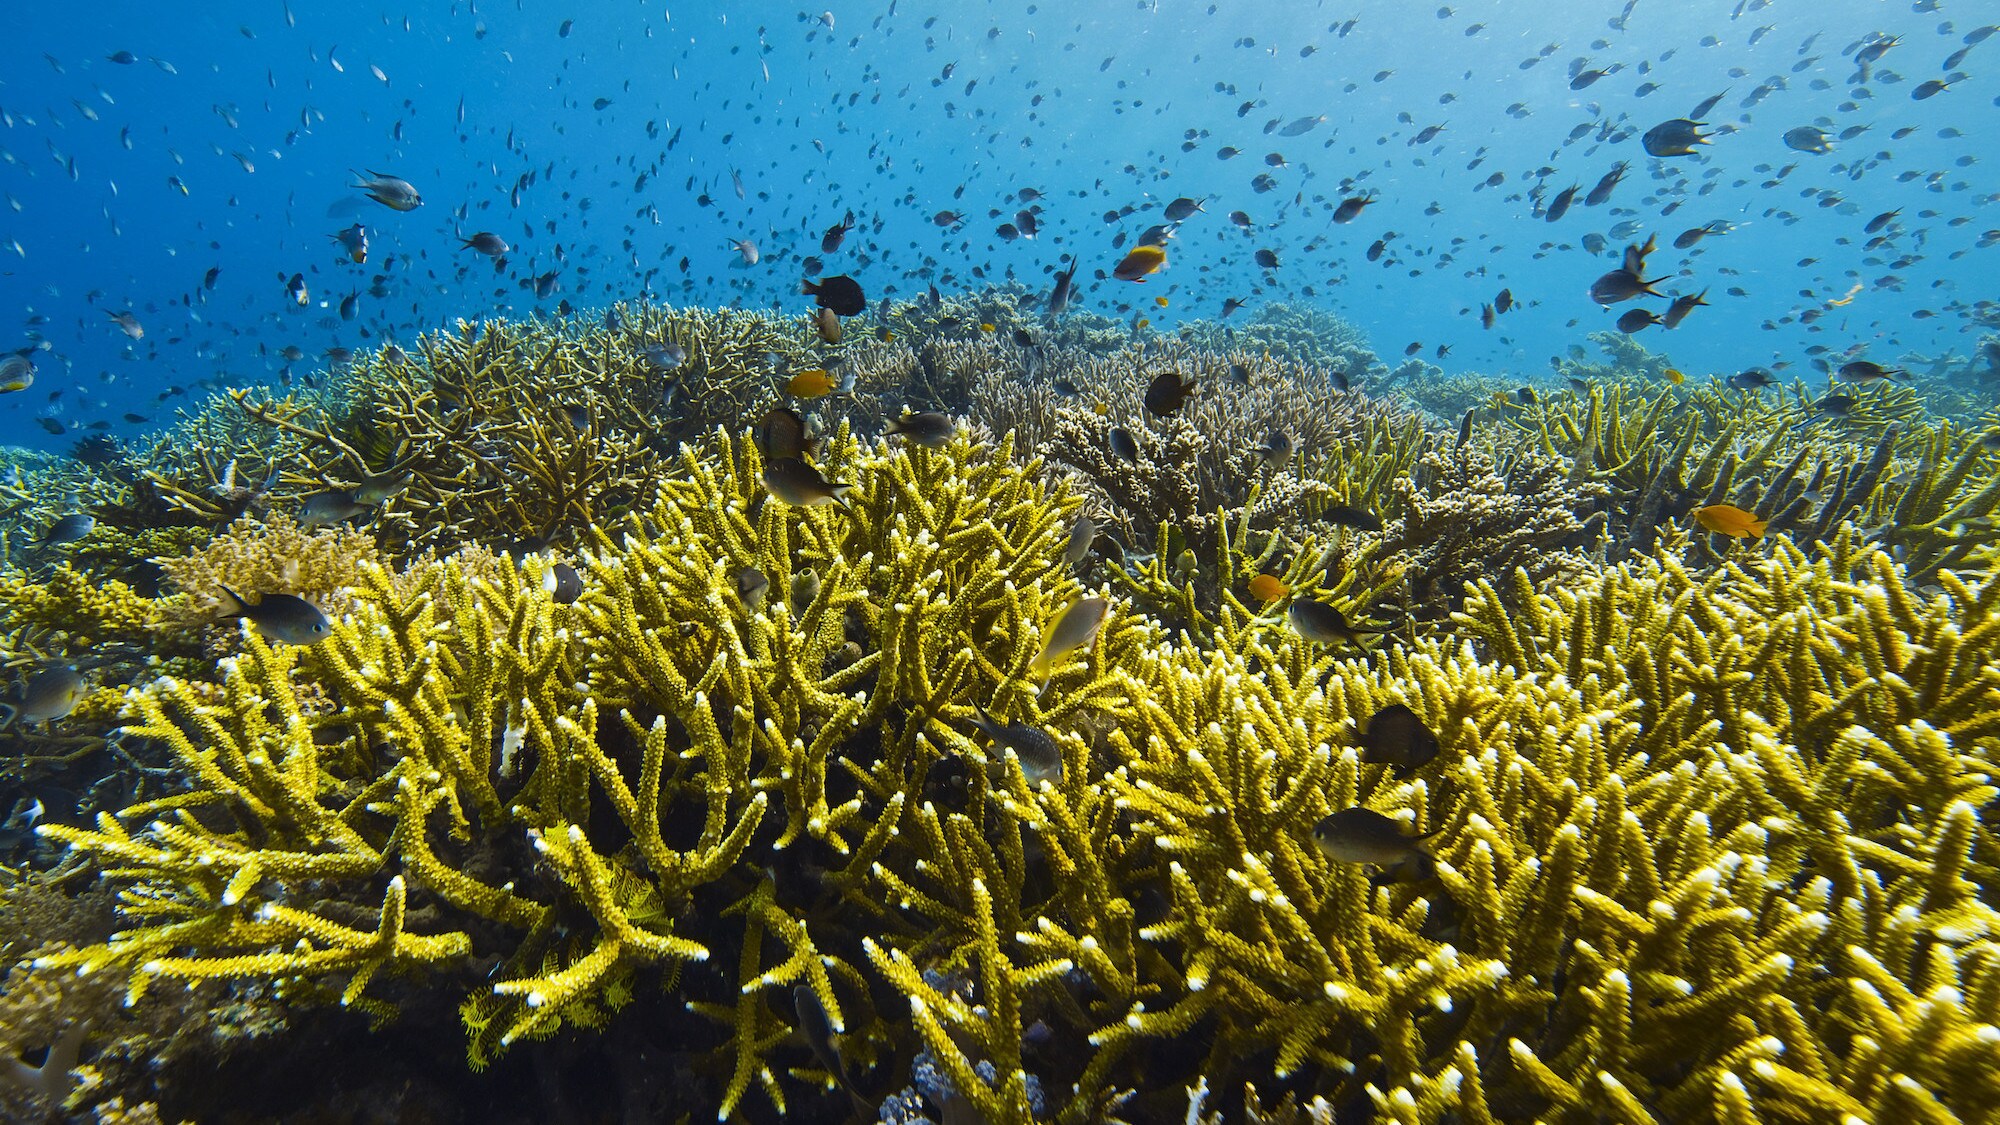 Schools of fish swimming over coral.  (National Geographic for Disney+/Bertie Gregory)